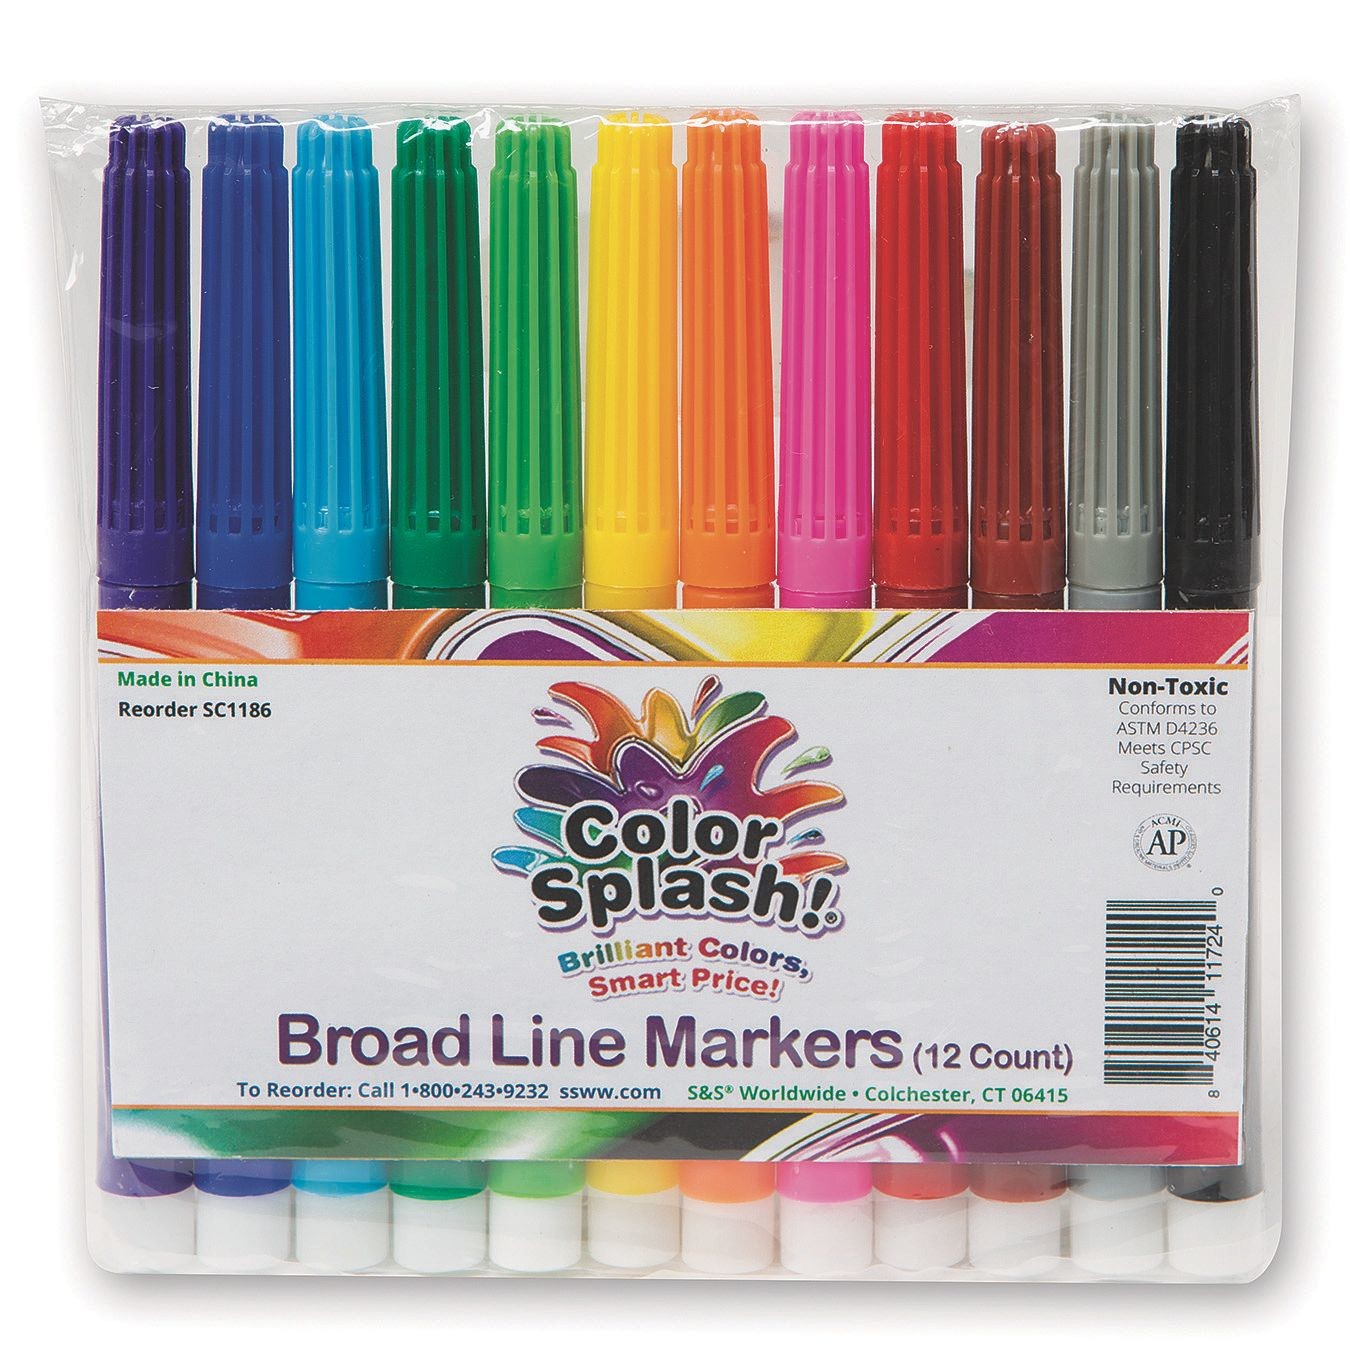 Color Splash! Permanent Markers (Pack of 12) from S&S Worldwide